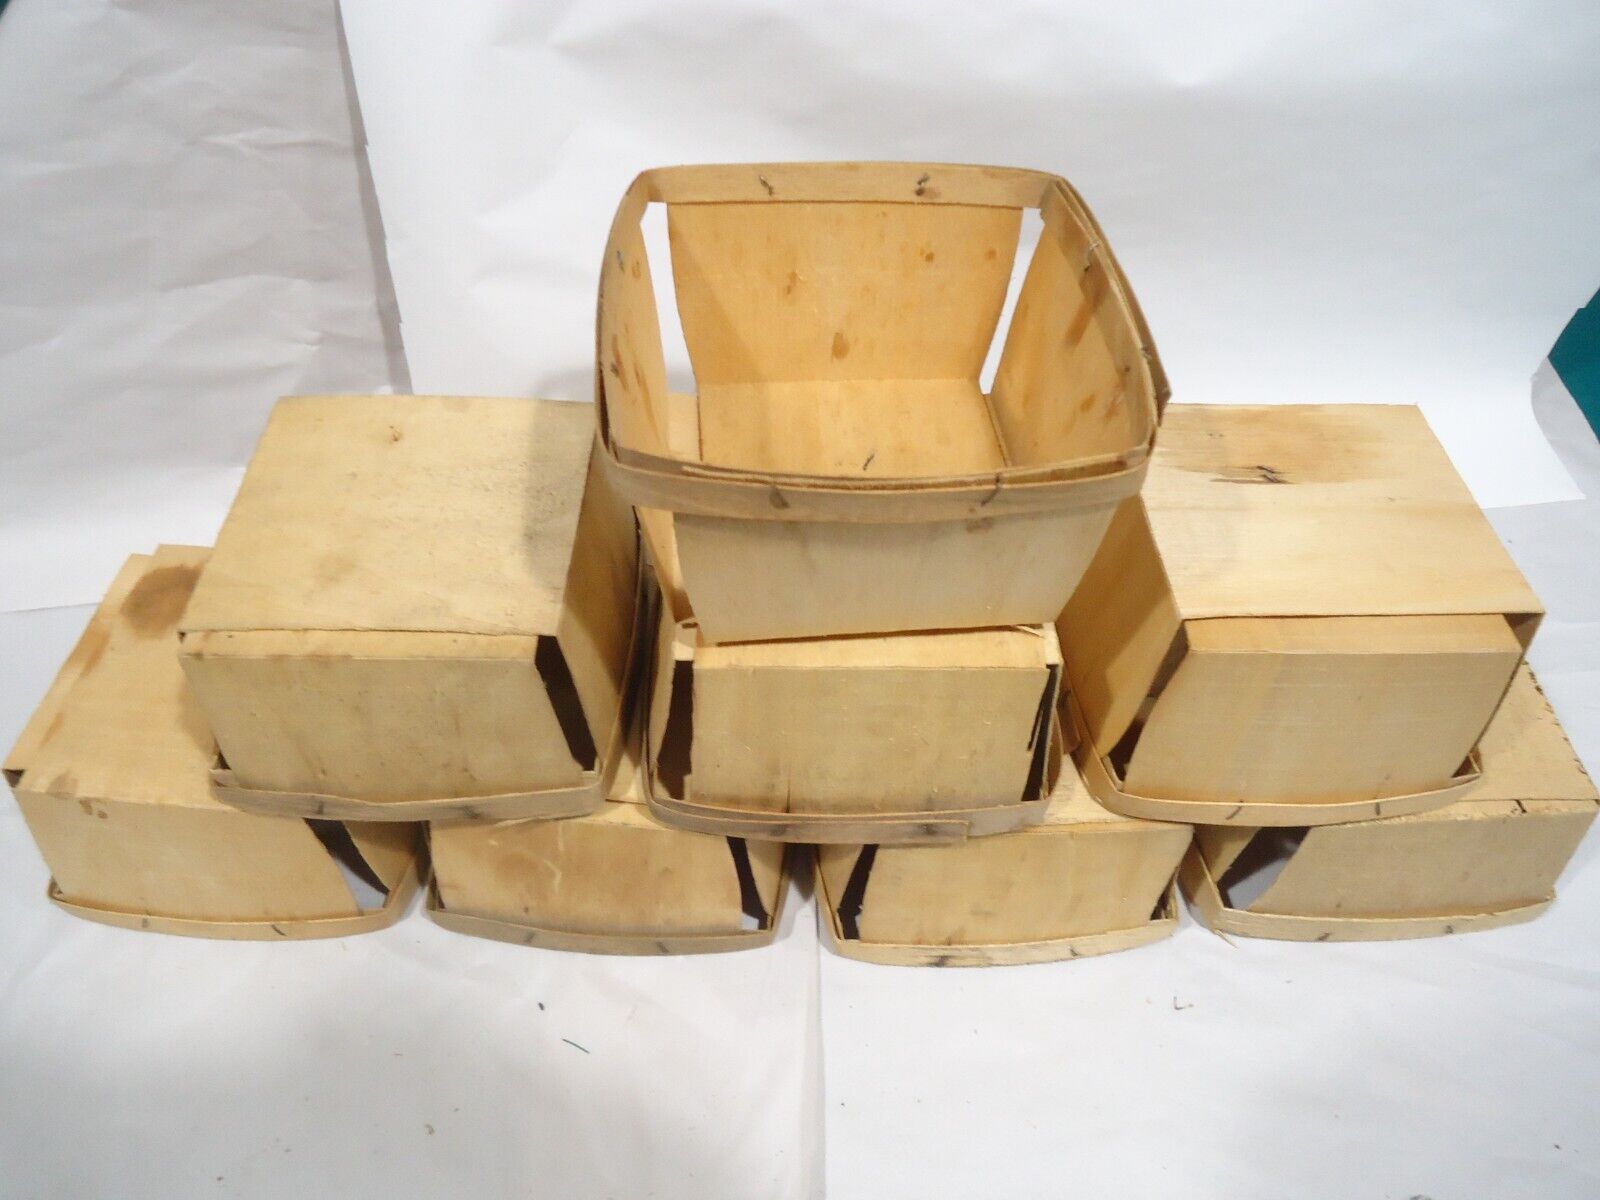 8 Vintage Primitive Wood Berry Baskets Boxes. 5 x 5 x 3. crafting.